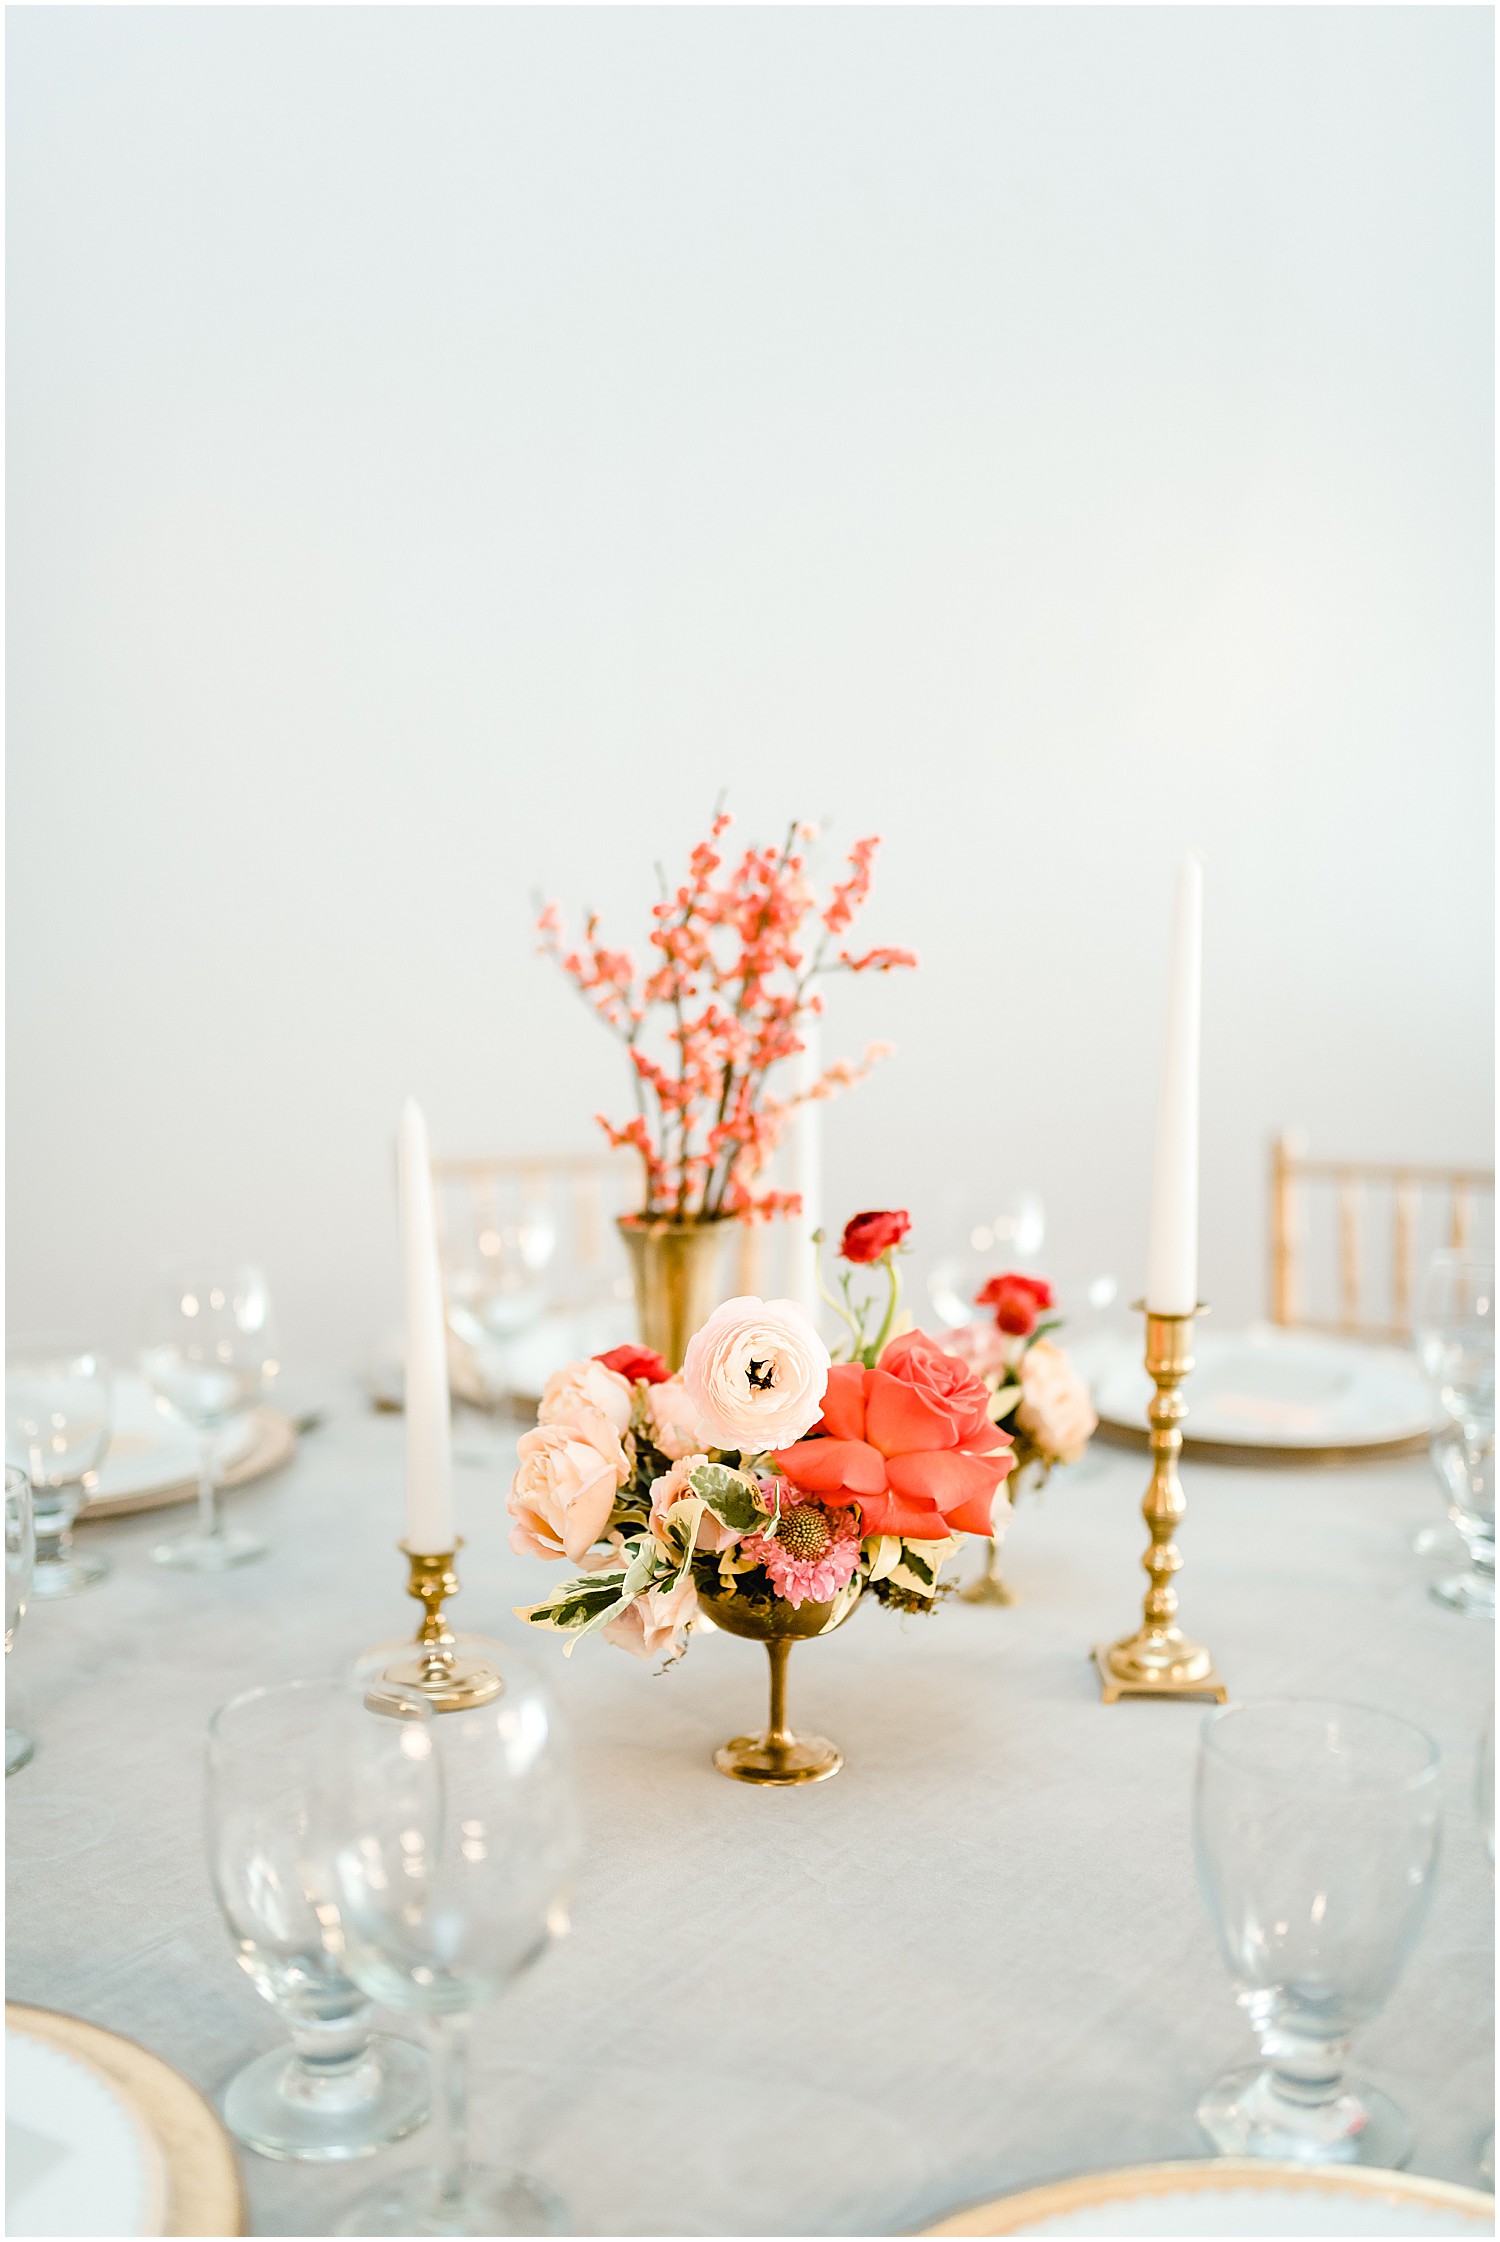 table setting details gold accents candlesticks coral florals